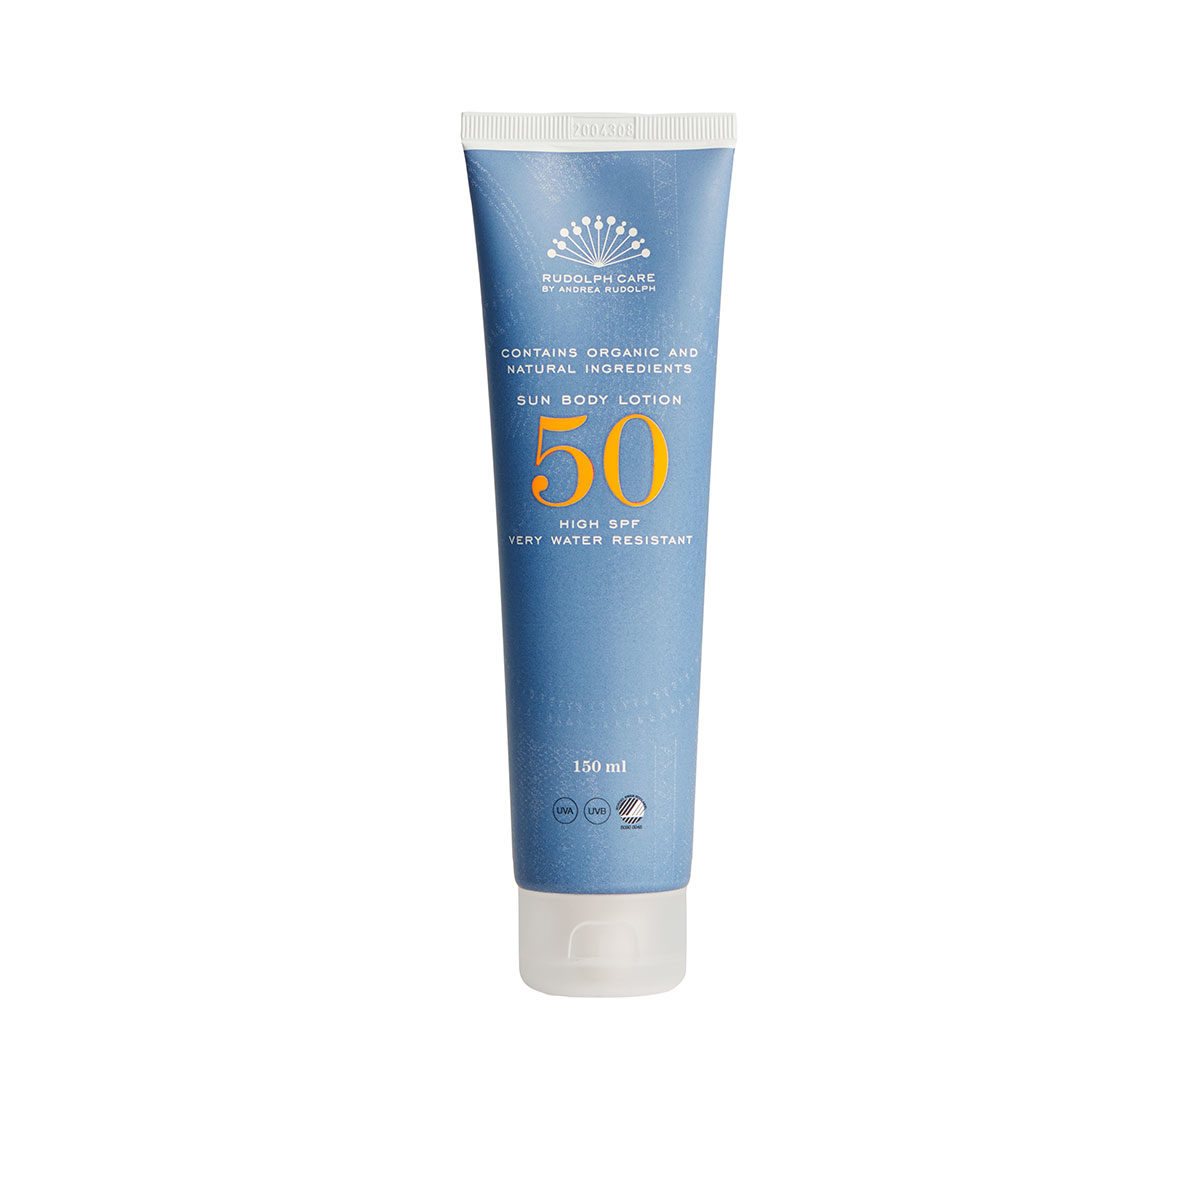 Solcreme 50 - Organic Sun Body Lotion - Rudolph Care Hectershop